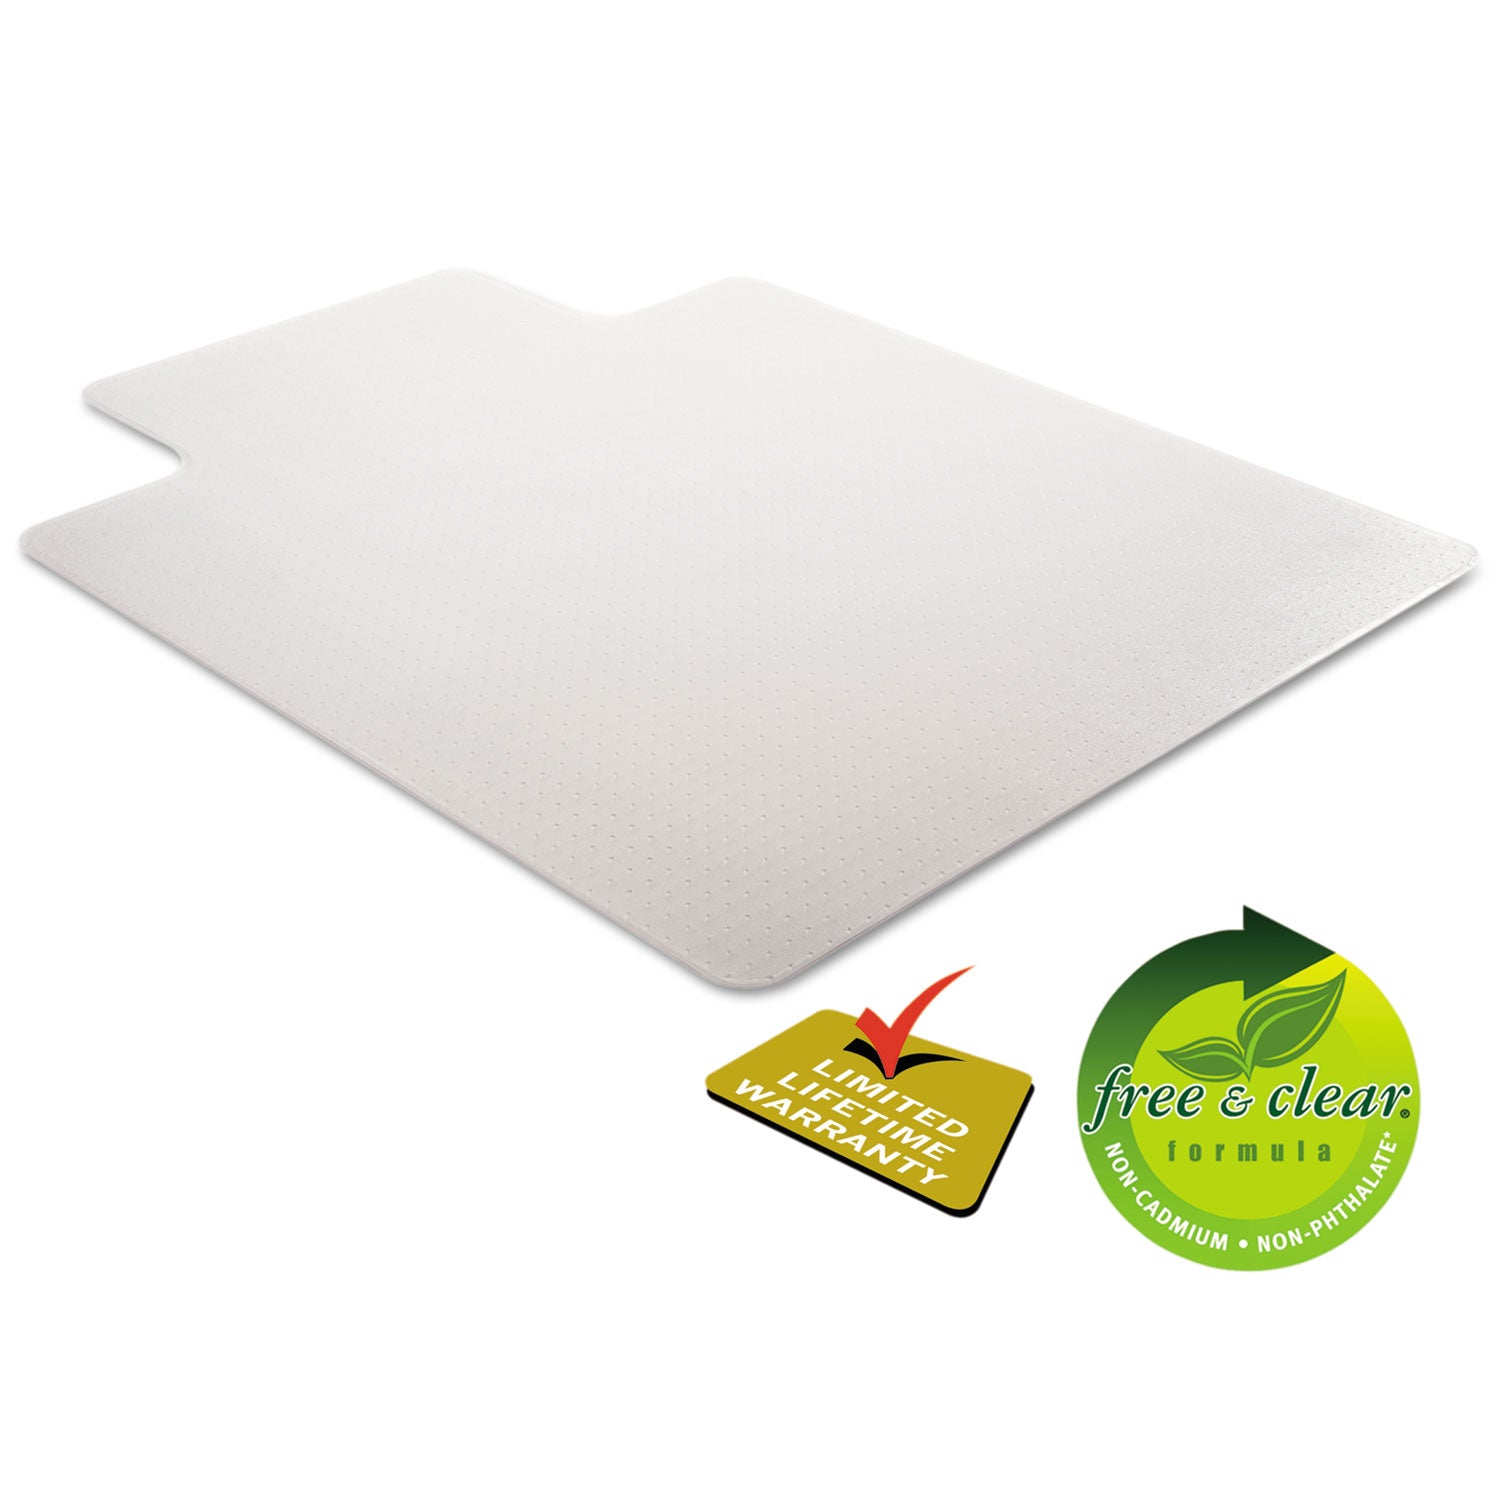 DuraMat Moderate Use Chair Mat for Low Pile Carpet, 45 x 53, Wide Lipped, Clear - 